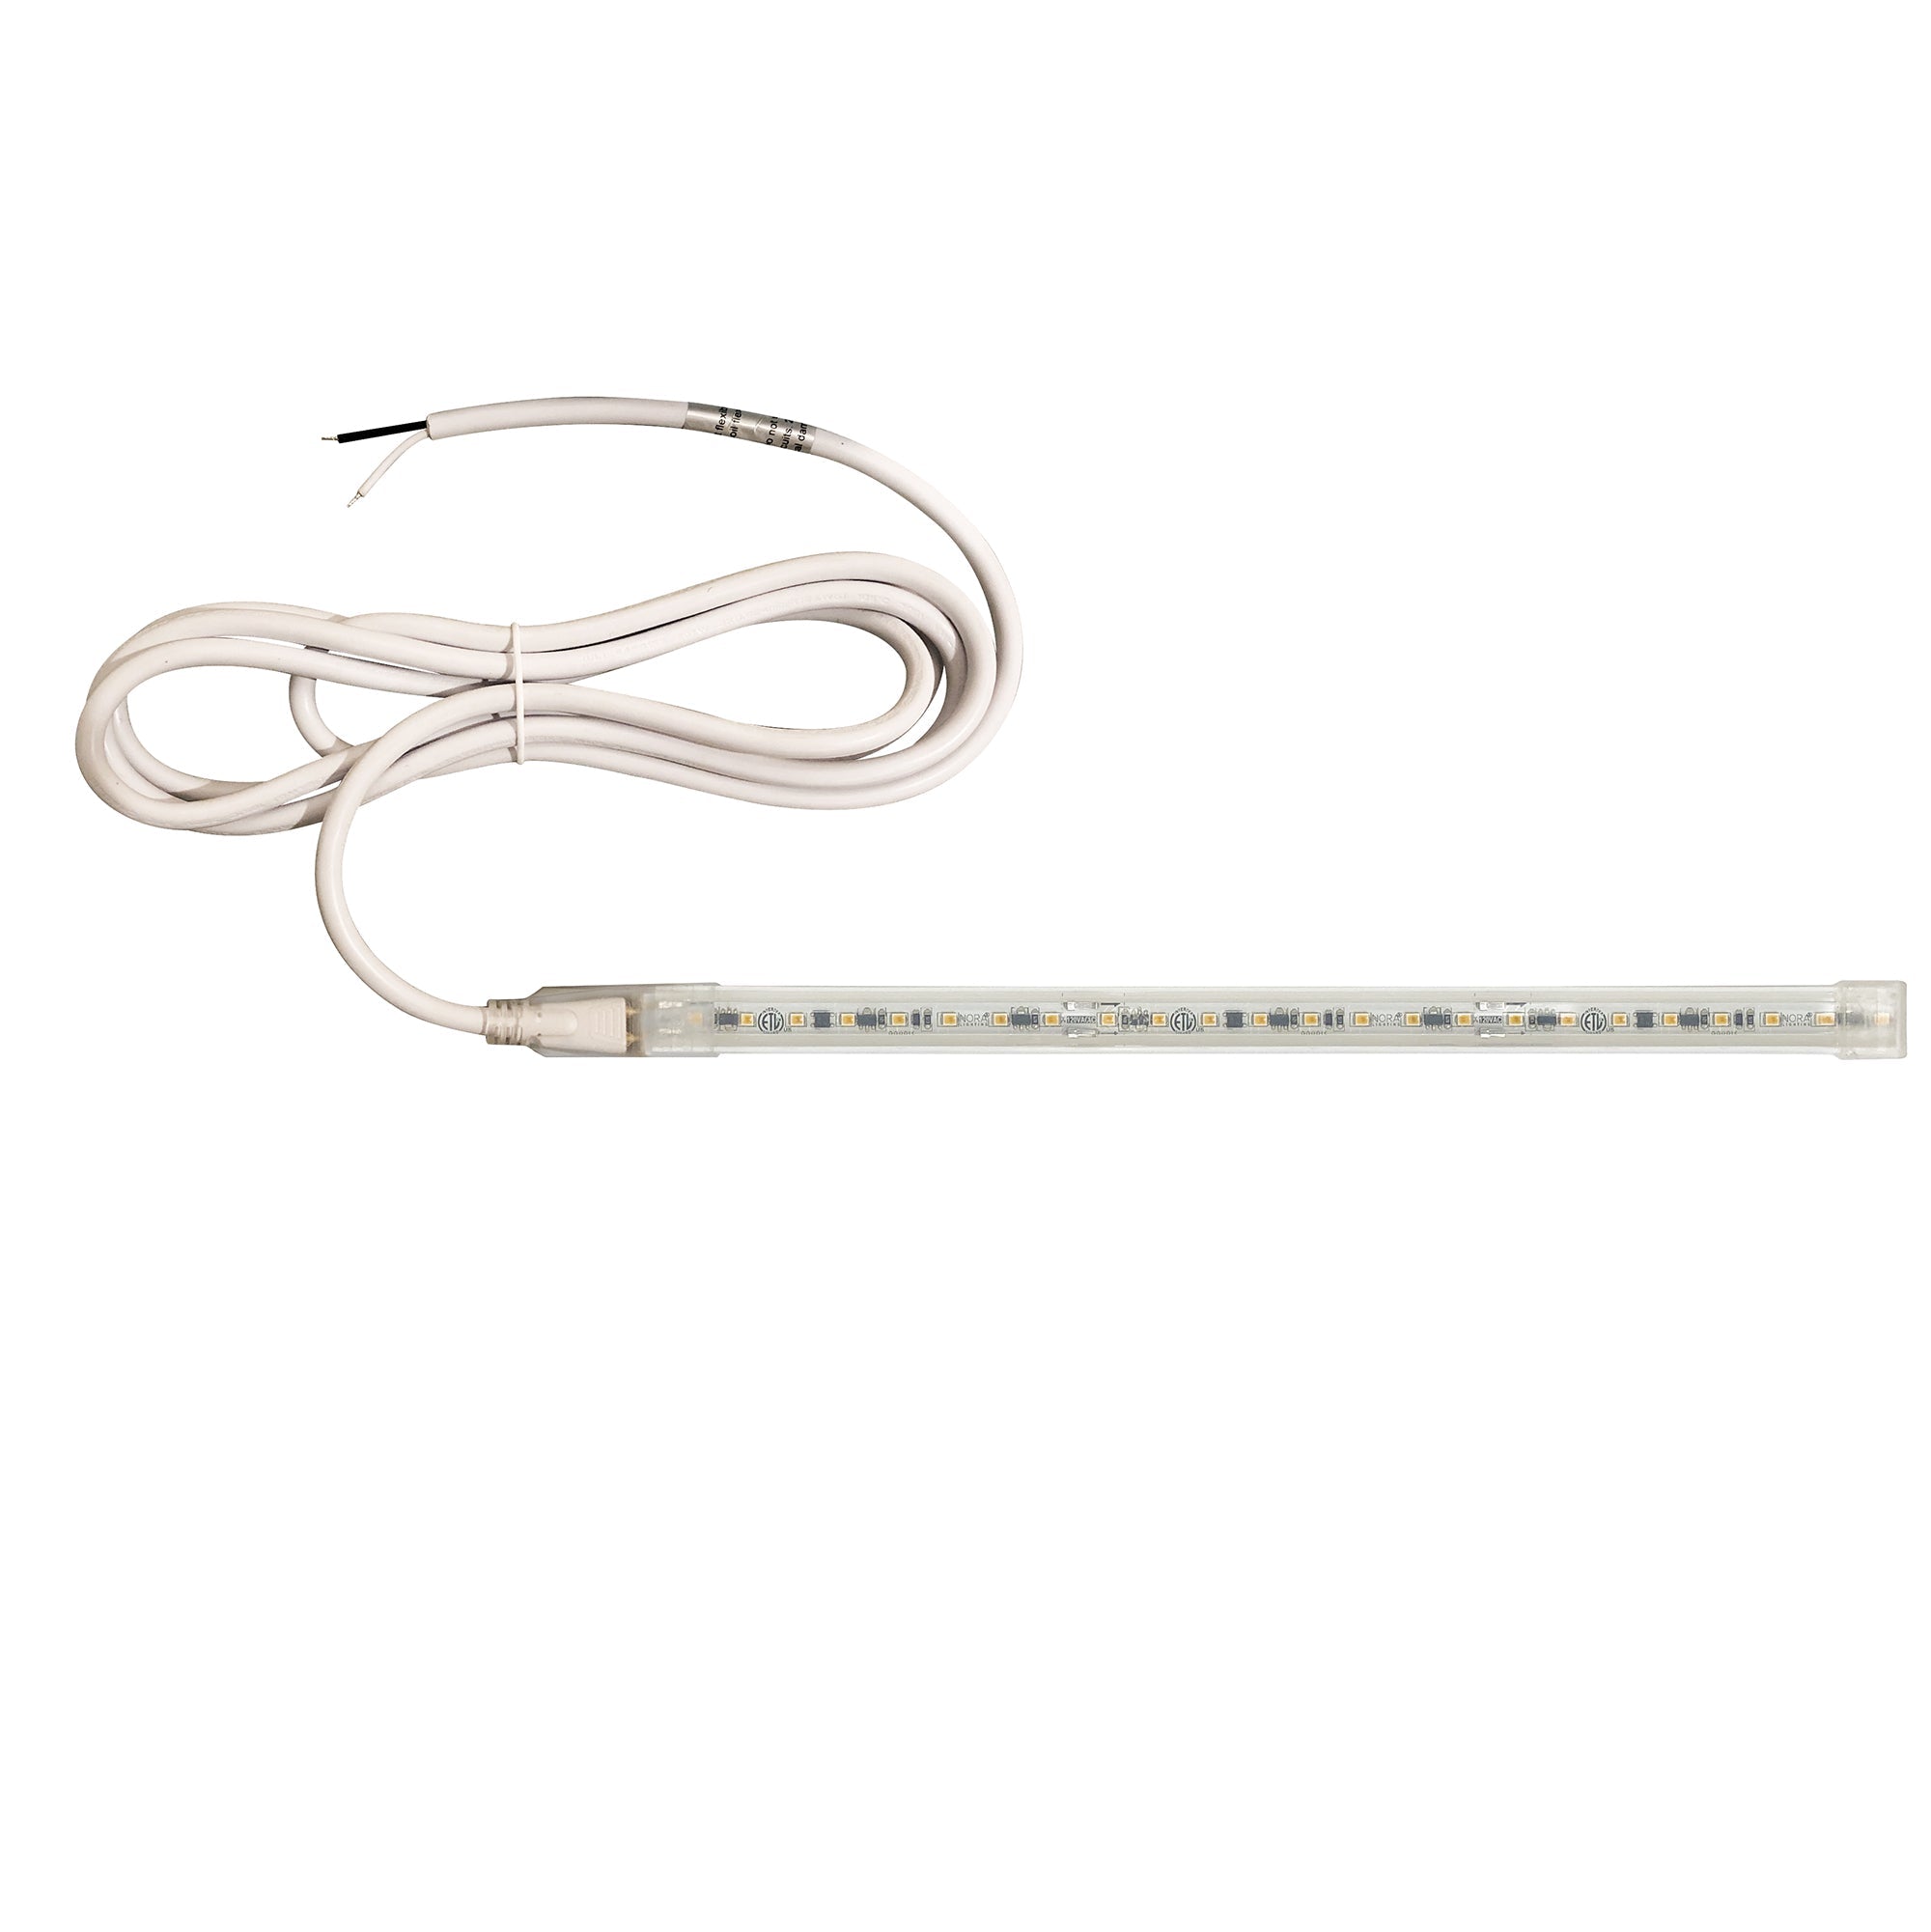 Nora Lighting NUTP13-W43-12-930/HW - Accent / Undercabinet - Custom Cut 43-ft 120V Continuous LED Tape Light, 330lm / 3.6W per foot, 3000K, w/ Mounting Clips and 8' Hardwired Power Cord